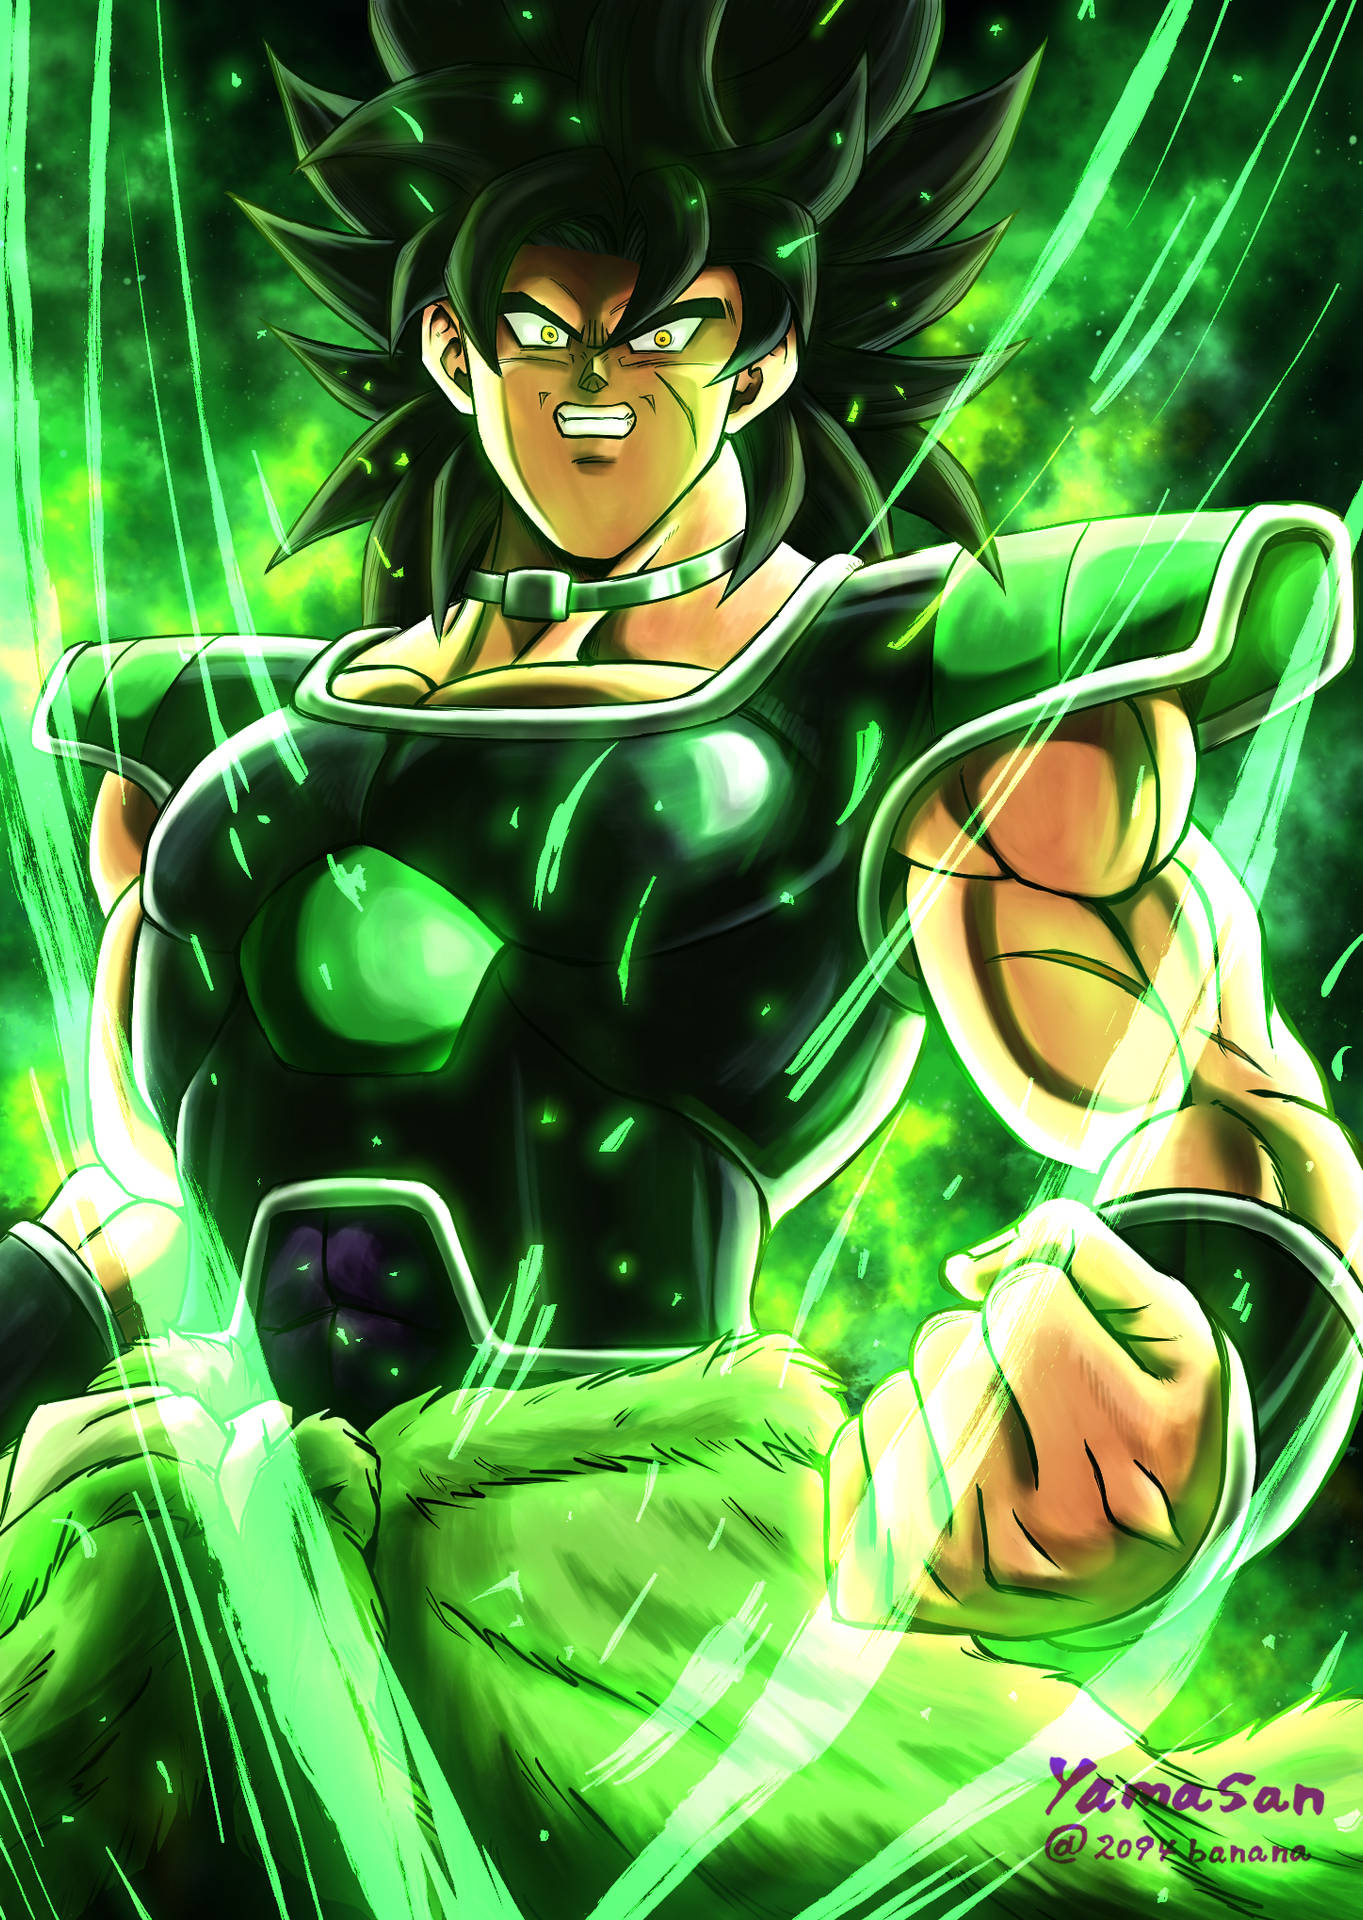 Does the Dragon Ball Super: Broly movie take place in the manga Canon or  the anime Canon? - Quora